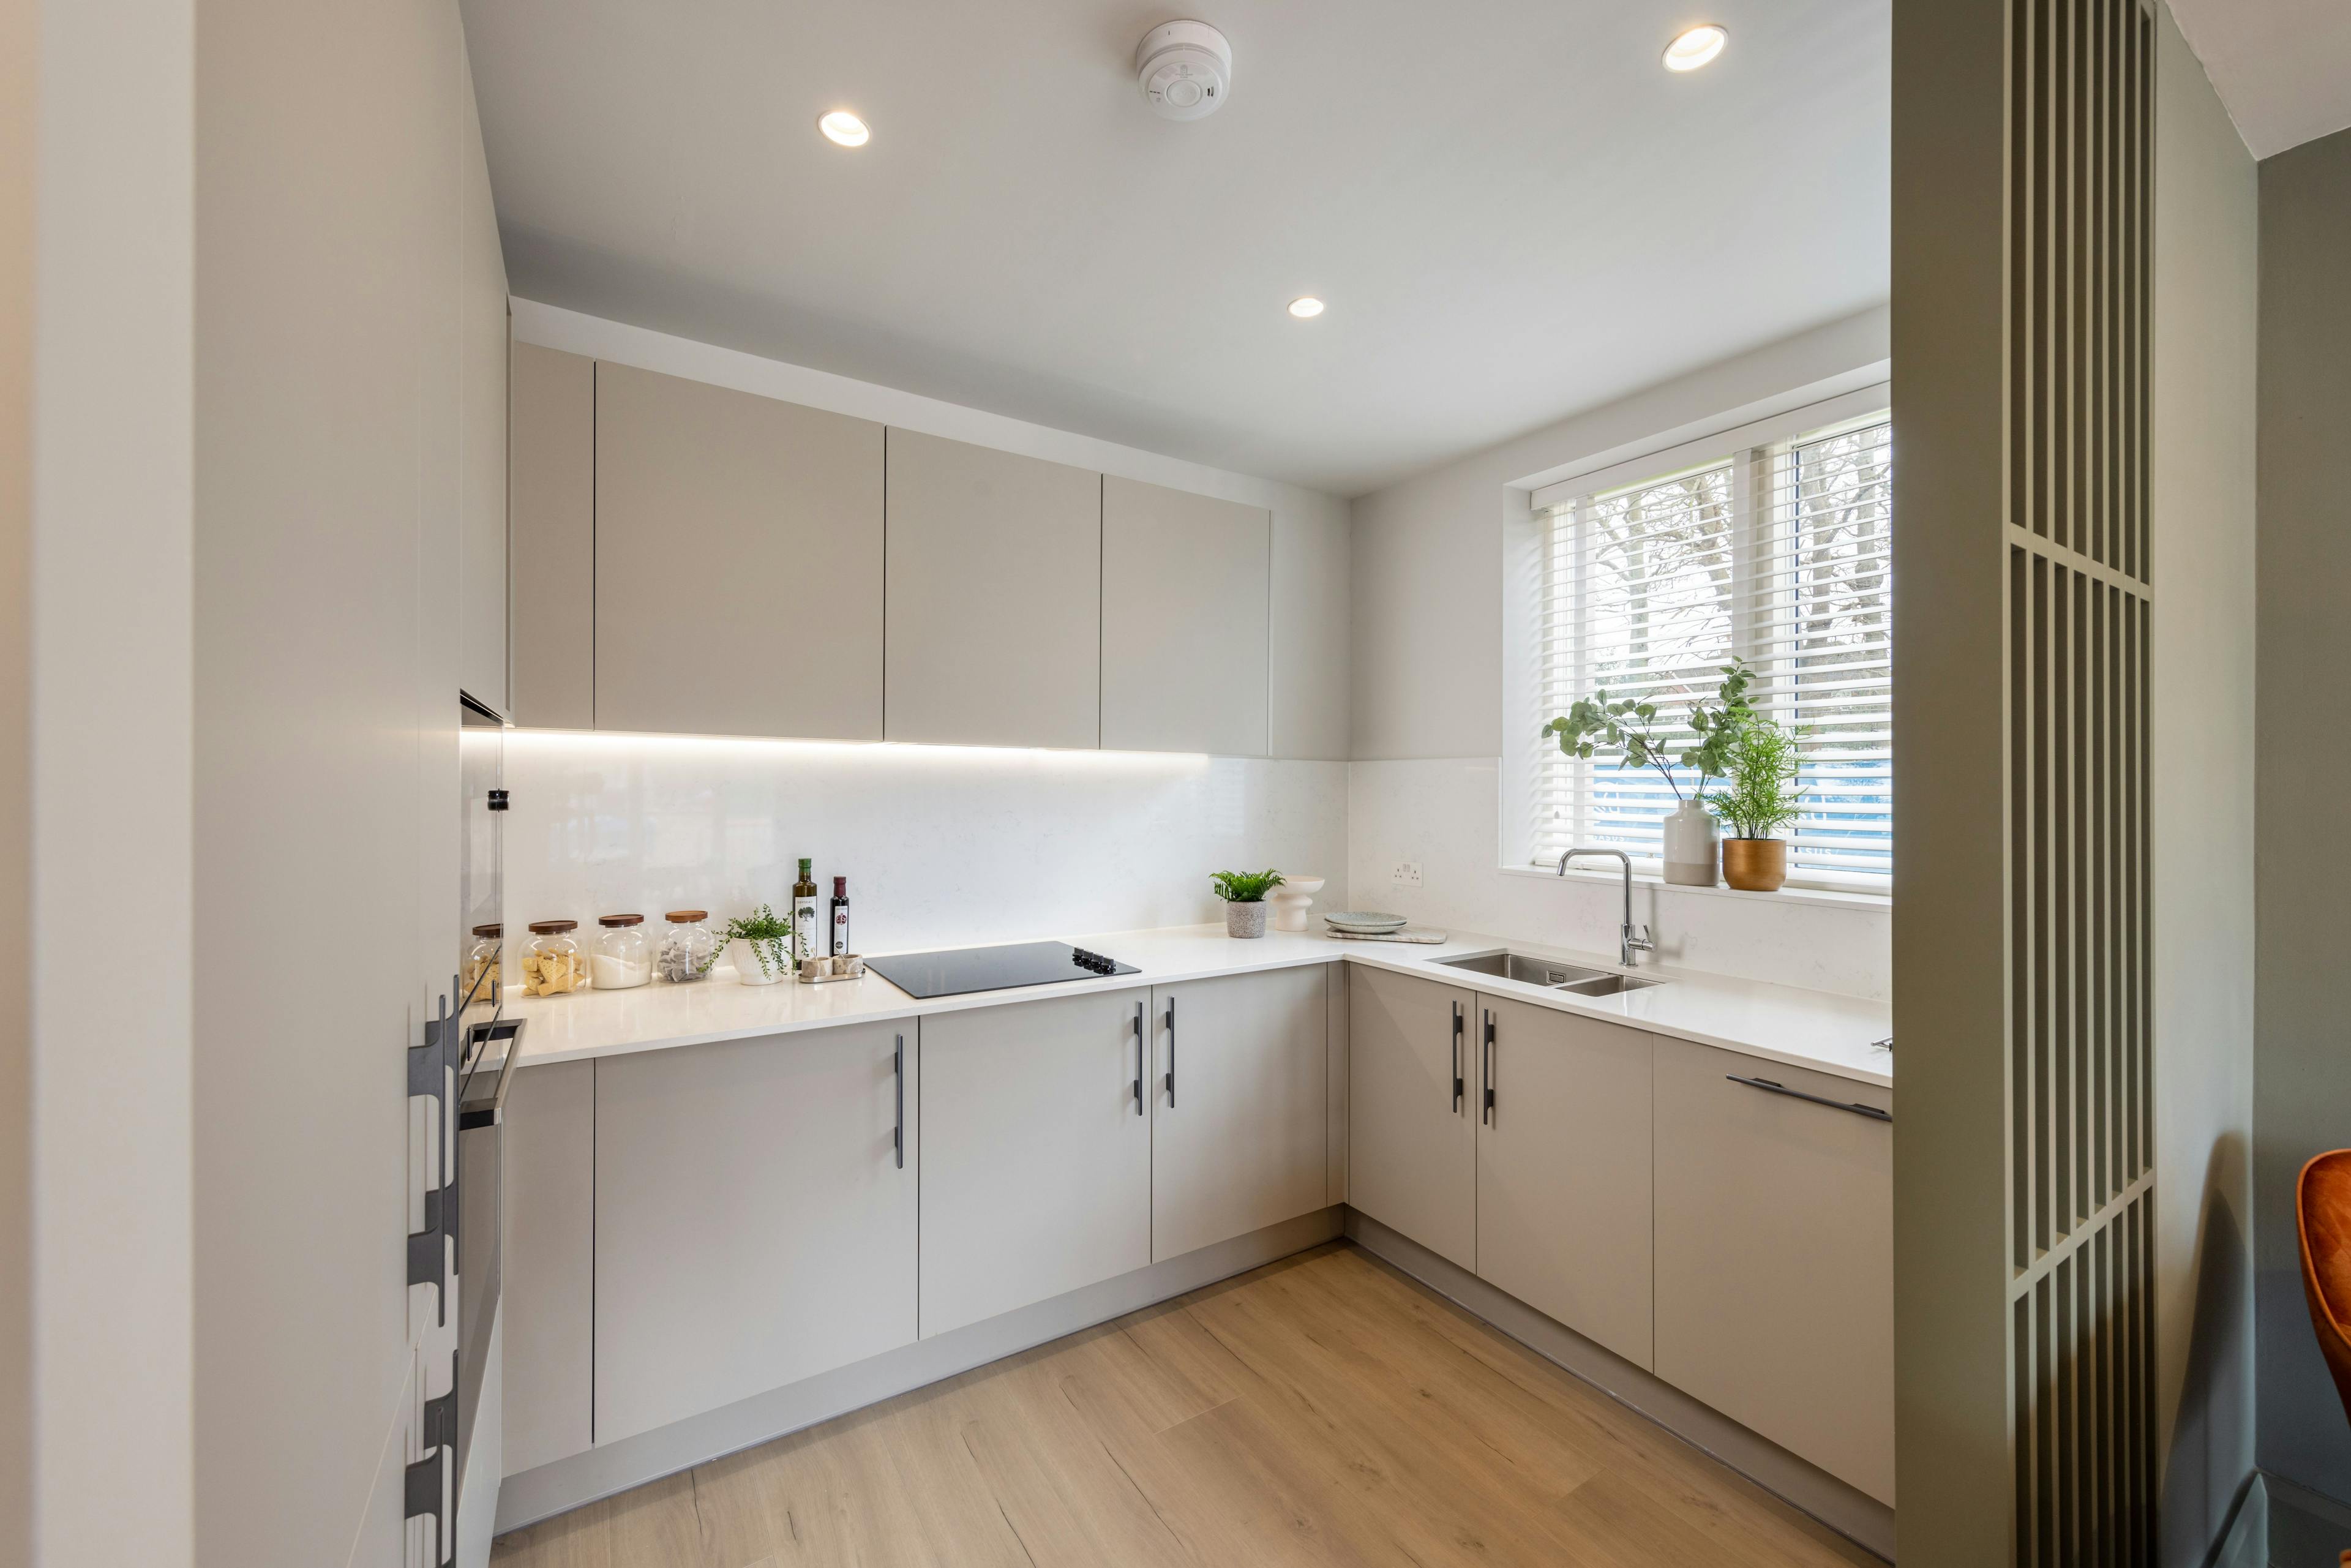 Kitchen at Highfield, West Byfleet Retirement Apartment in Surrey, South East England